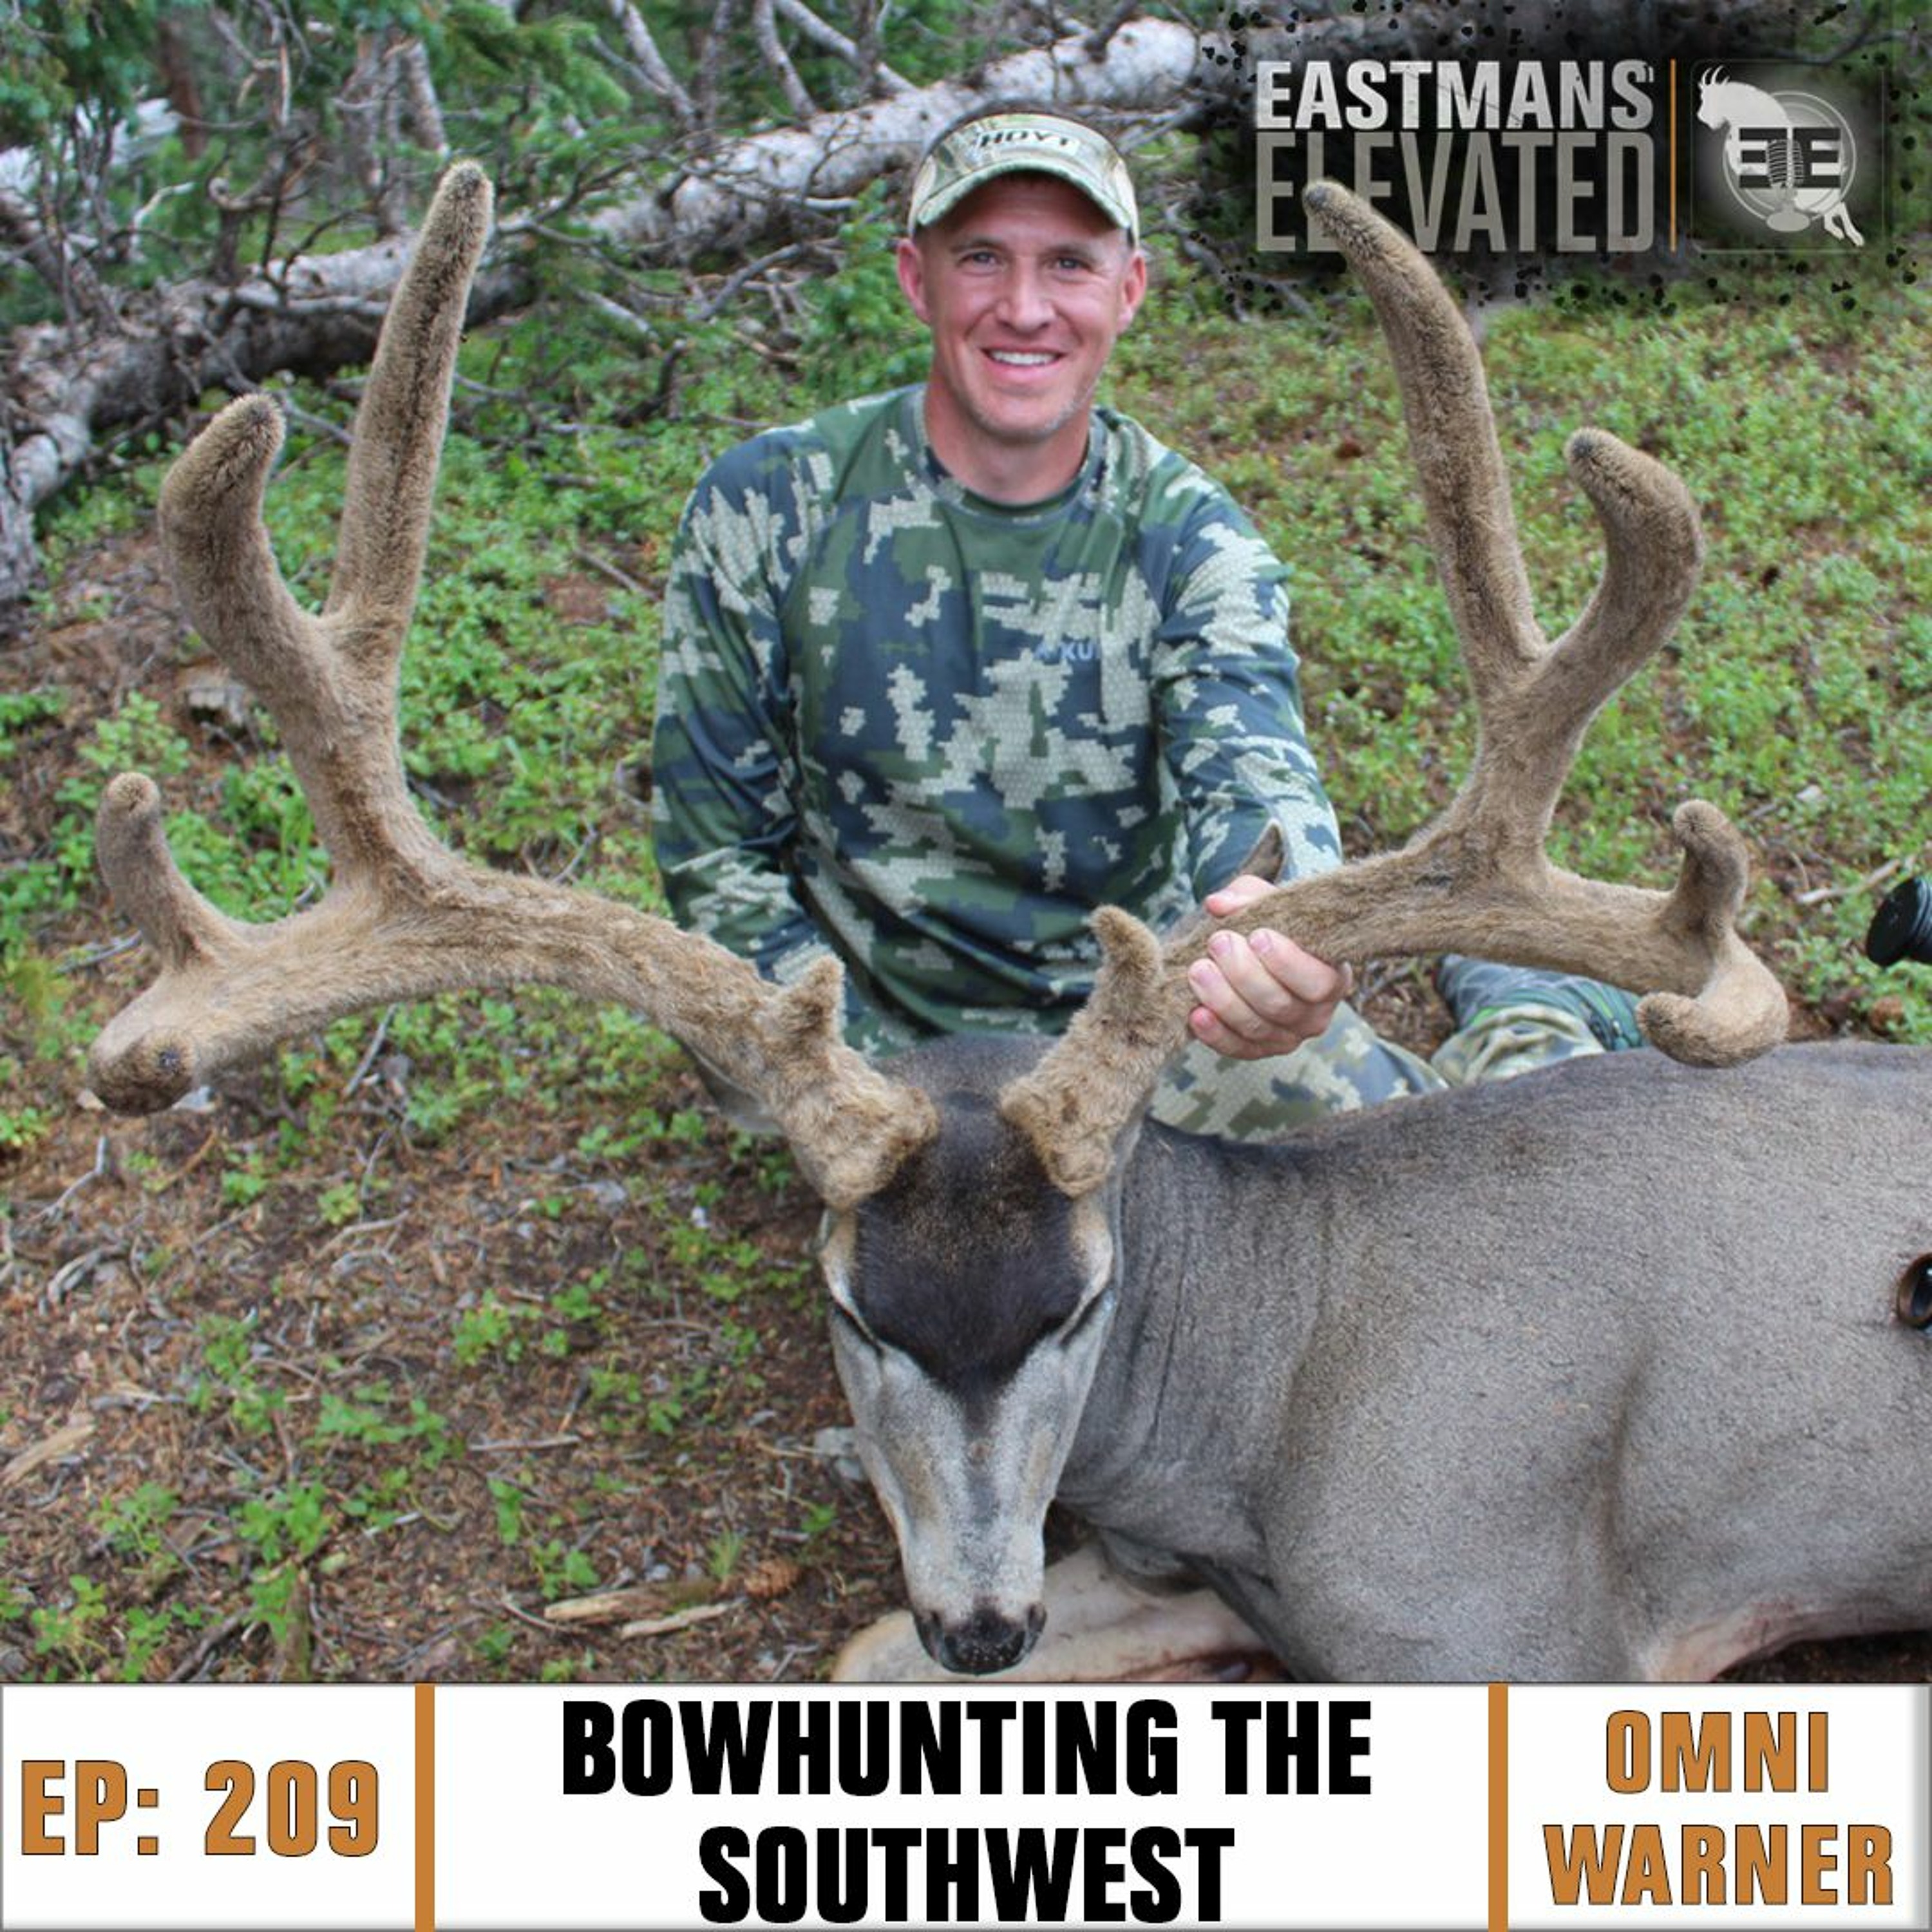 Episode 209: Bowhunting the Southwest with Omni Warner